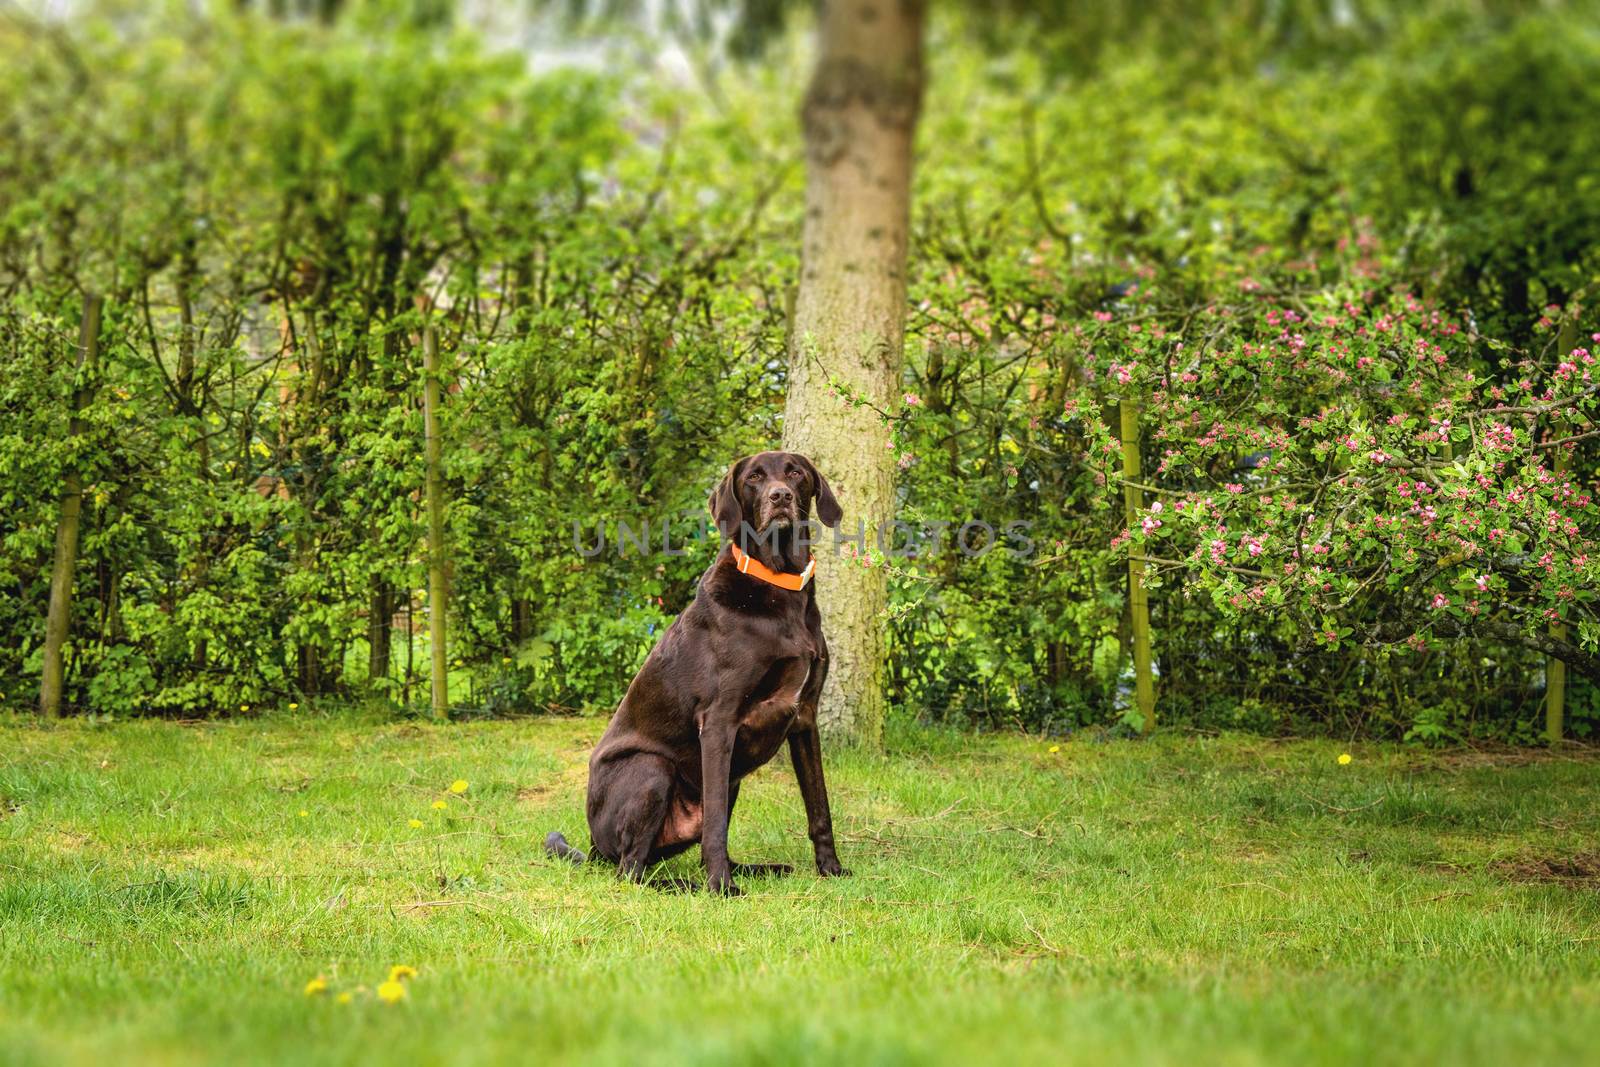 Brown labrador dog sitting on a lawn in a green garden in the springtime with an orange collar